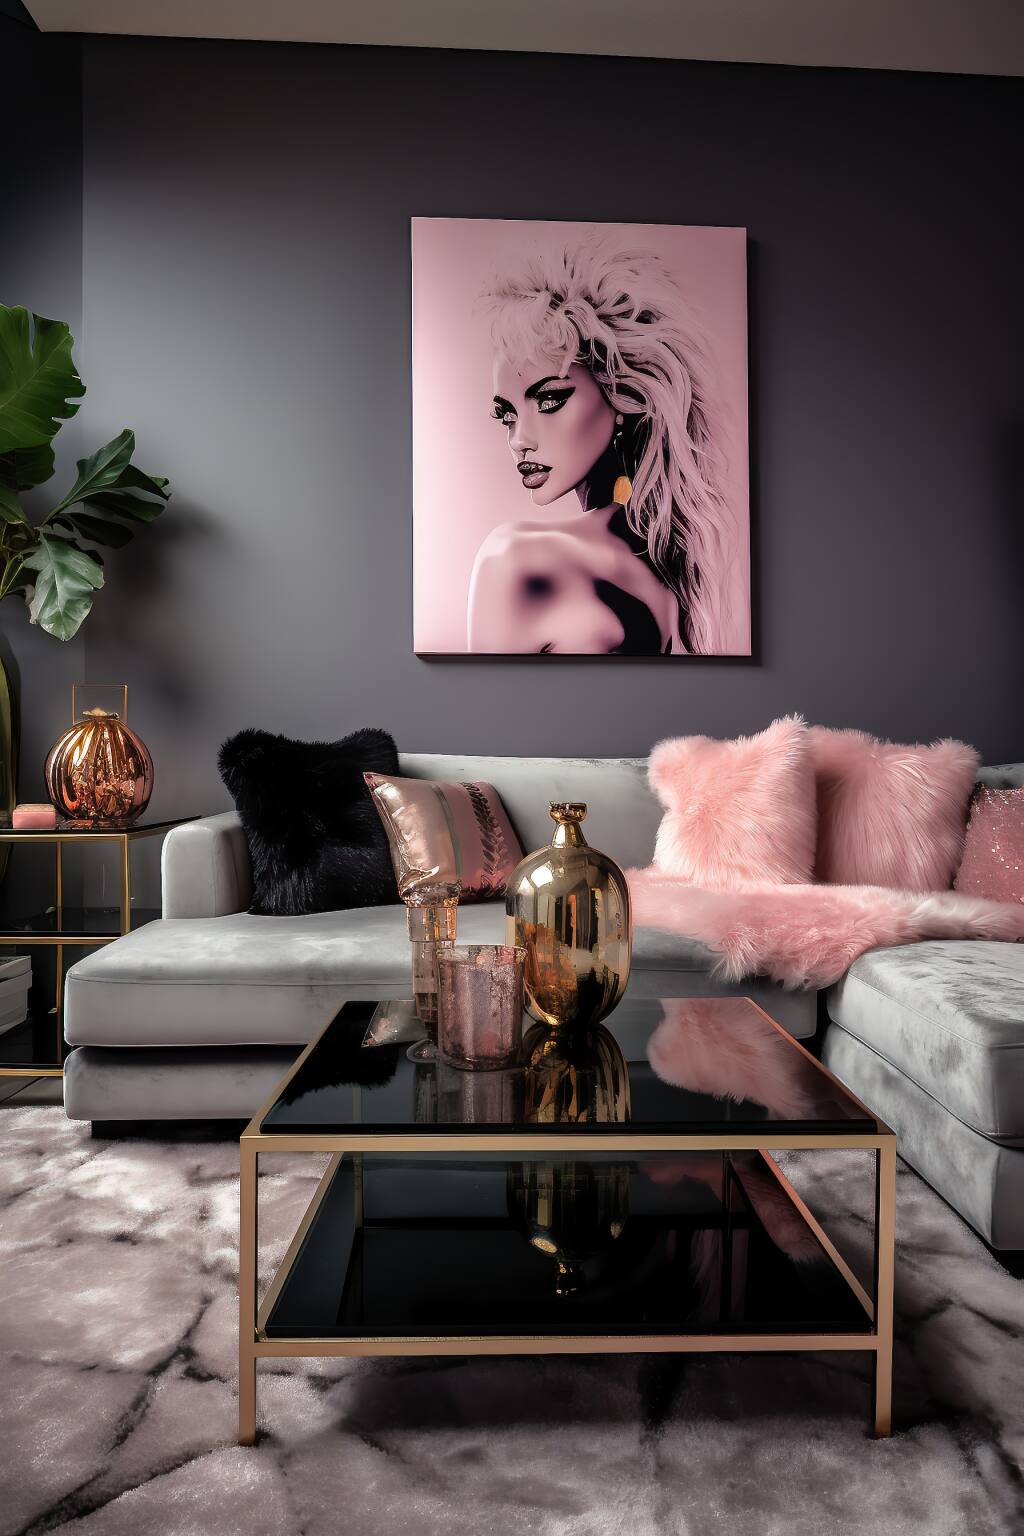 A Chic Living Room With Dark Grey Walls, A Velvet Sofa With Pink Pillows, A Glass Coffee Table, And A Pop-Art Portrait In Pink Tones.